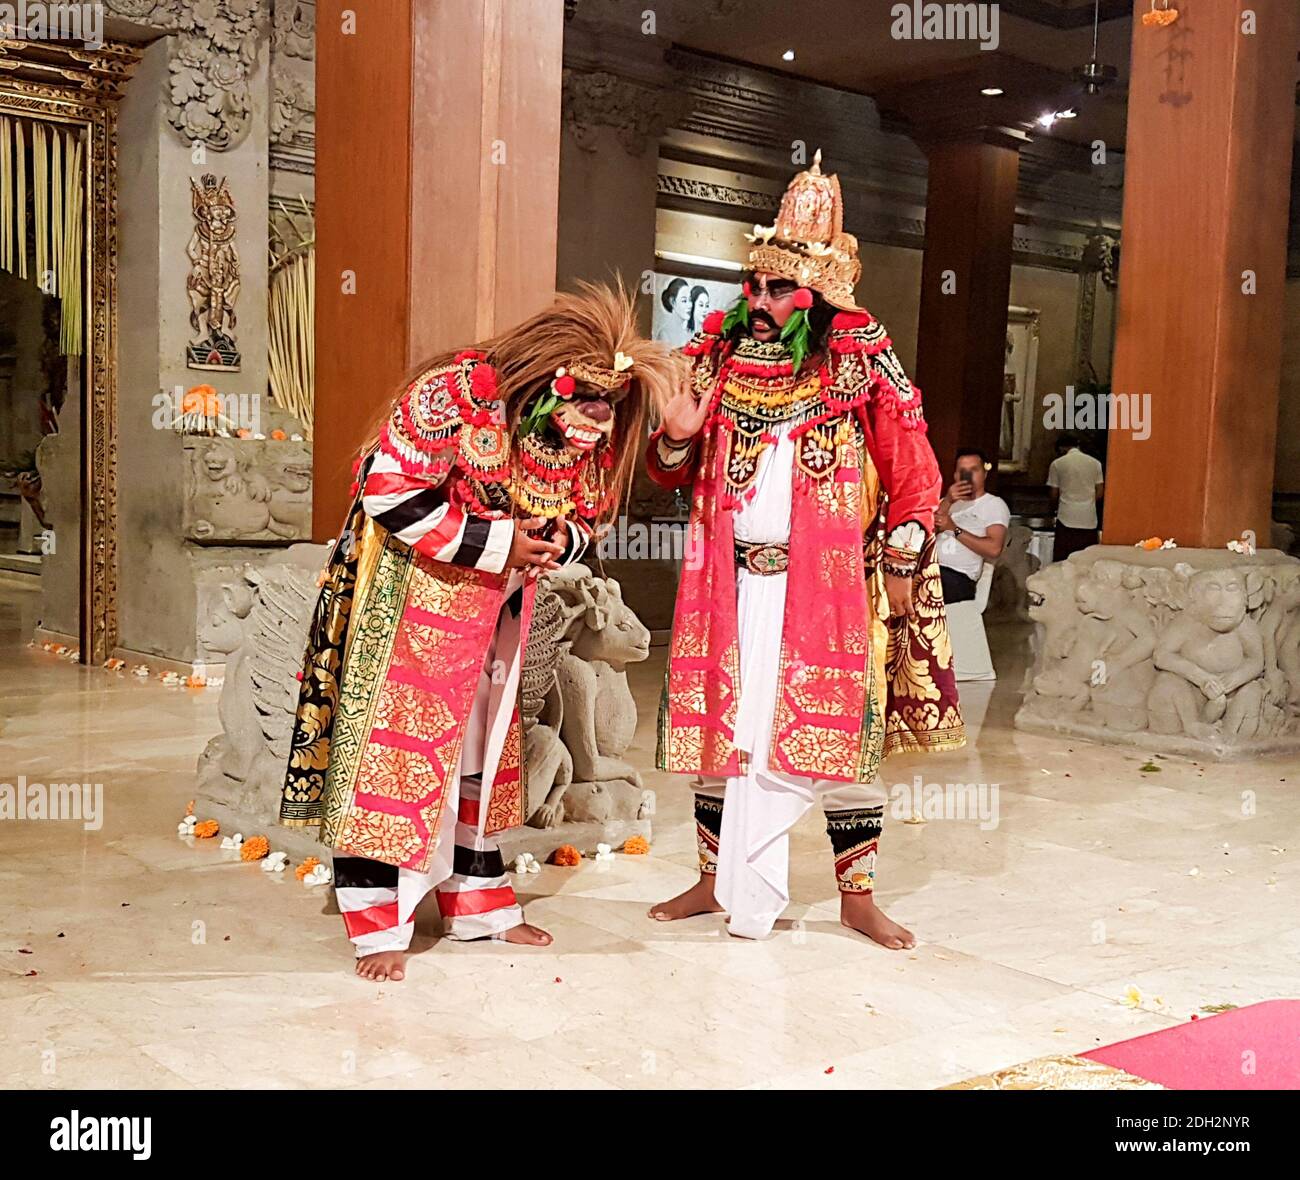 UBUD, BALI, INDONESIA - MAY 11, 2017: Dancers in traditional Balinese costumes perform the Ramayana Story dance with codified hand positions and eye m Stock Photo